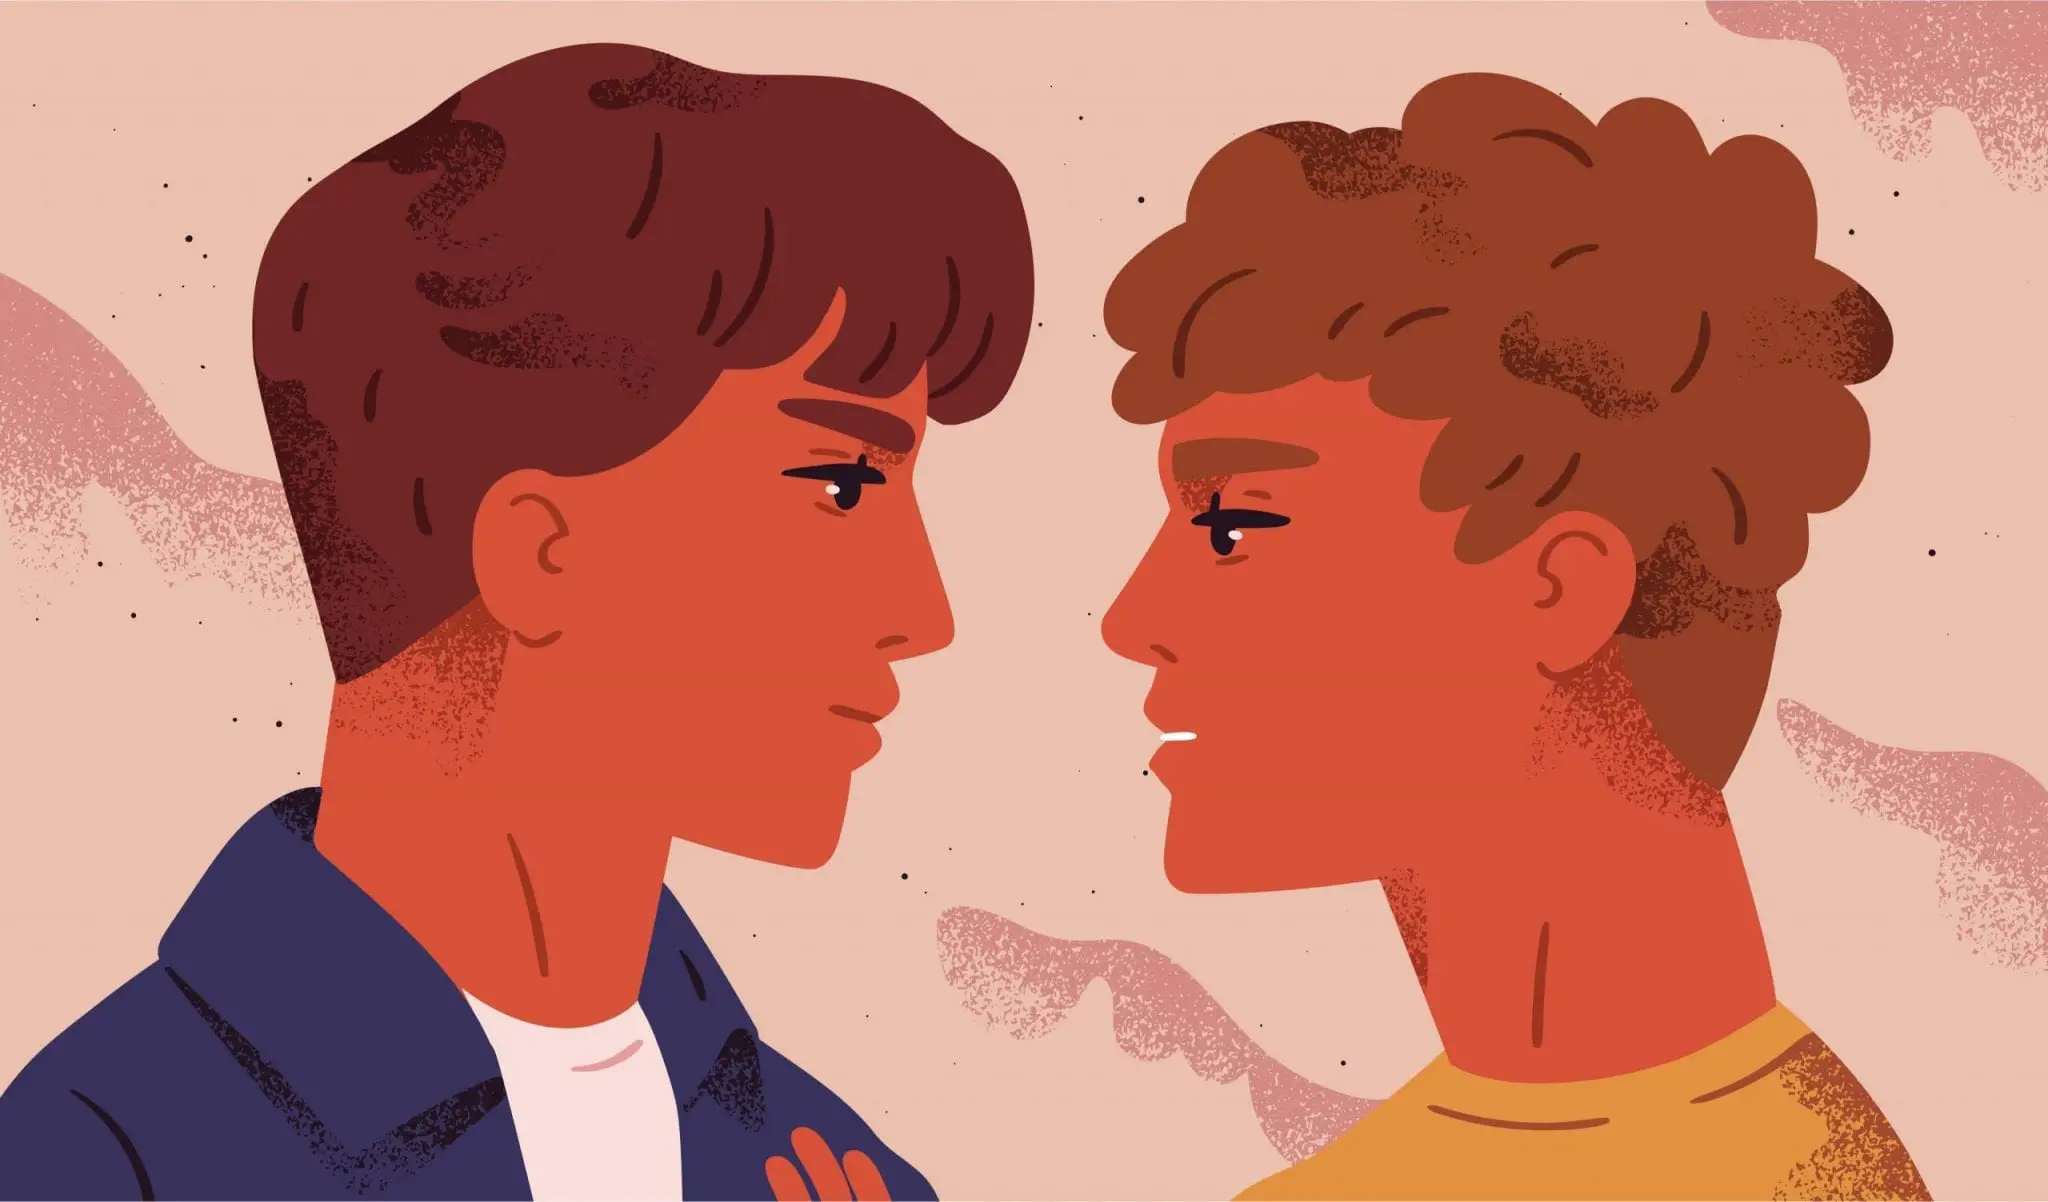 LGBT Couple. Portrait of Gay Couple Looking at Each Other. Pair of Romantic Partners on a Date. Homosexual Relationship